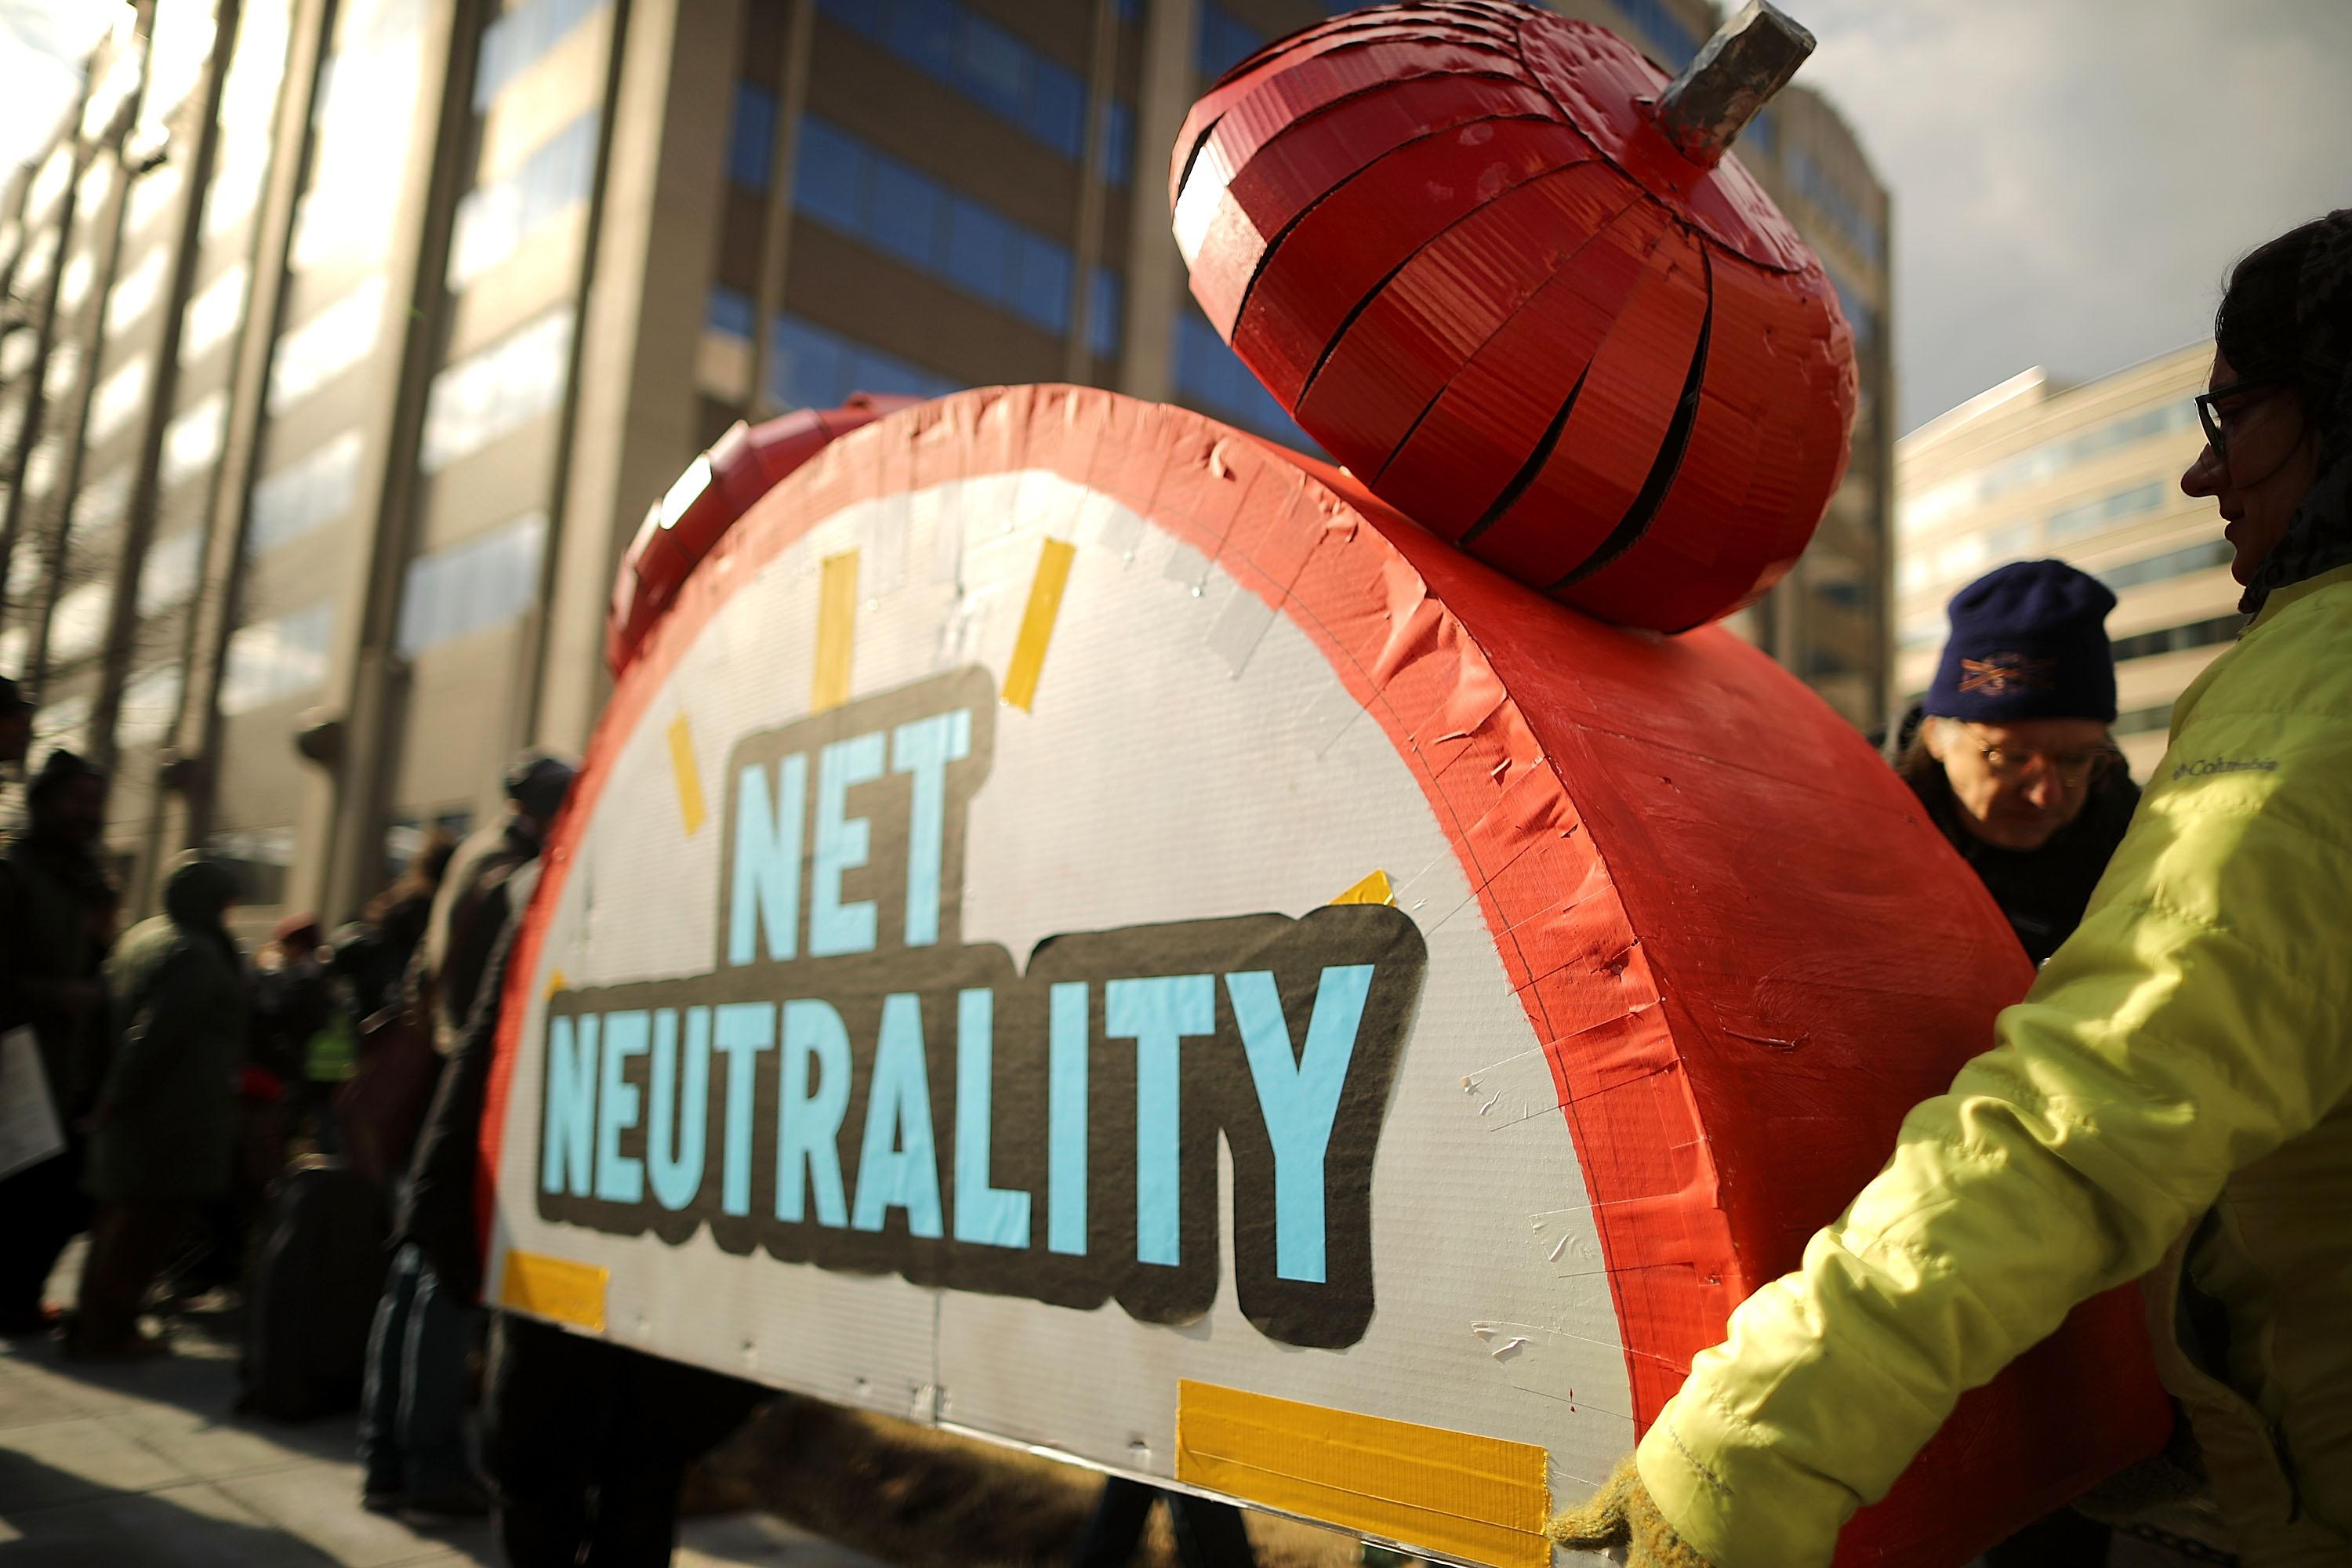 Net Neutrality Returns with New Broadband Rules: A Battle for Regulation and Innovation